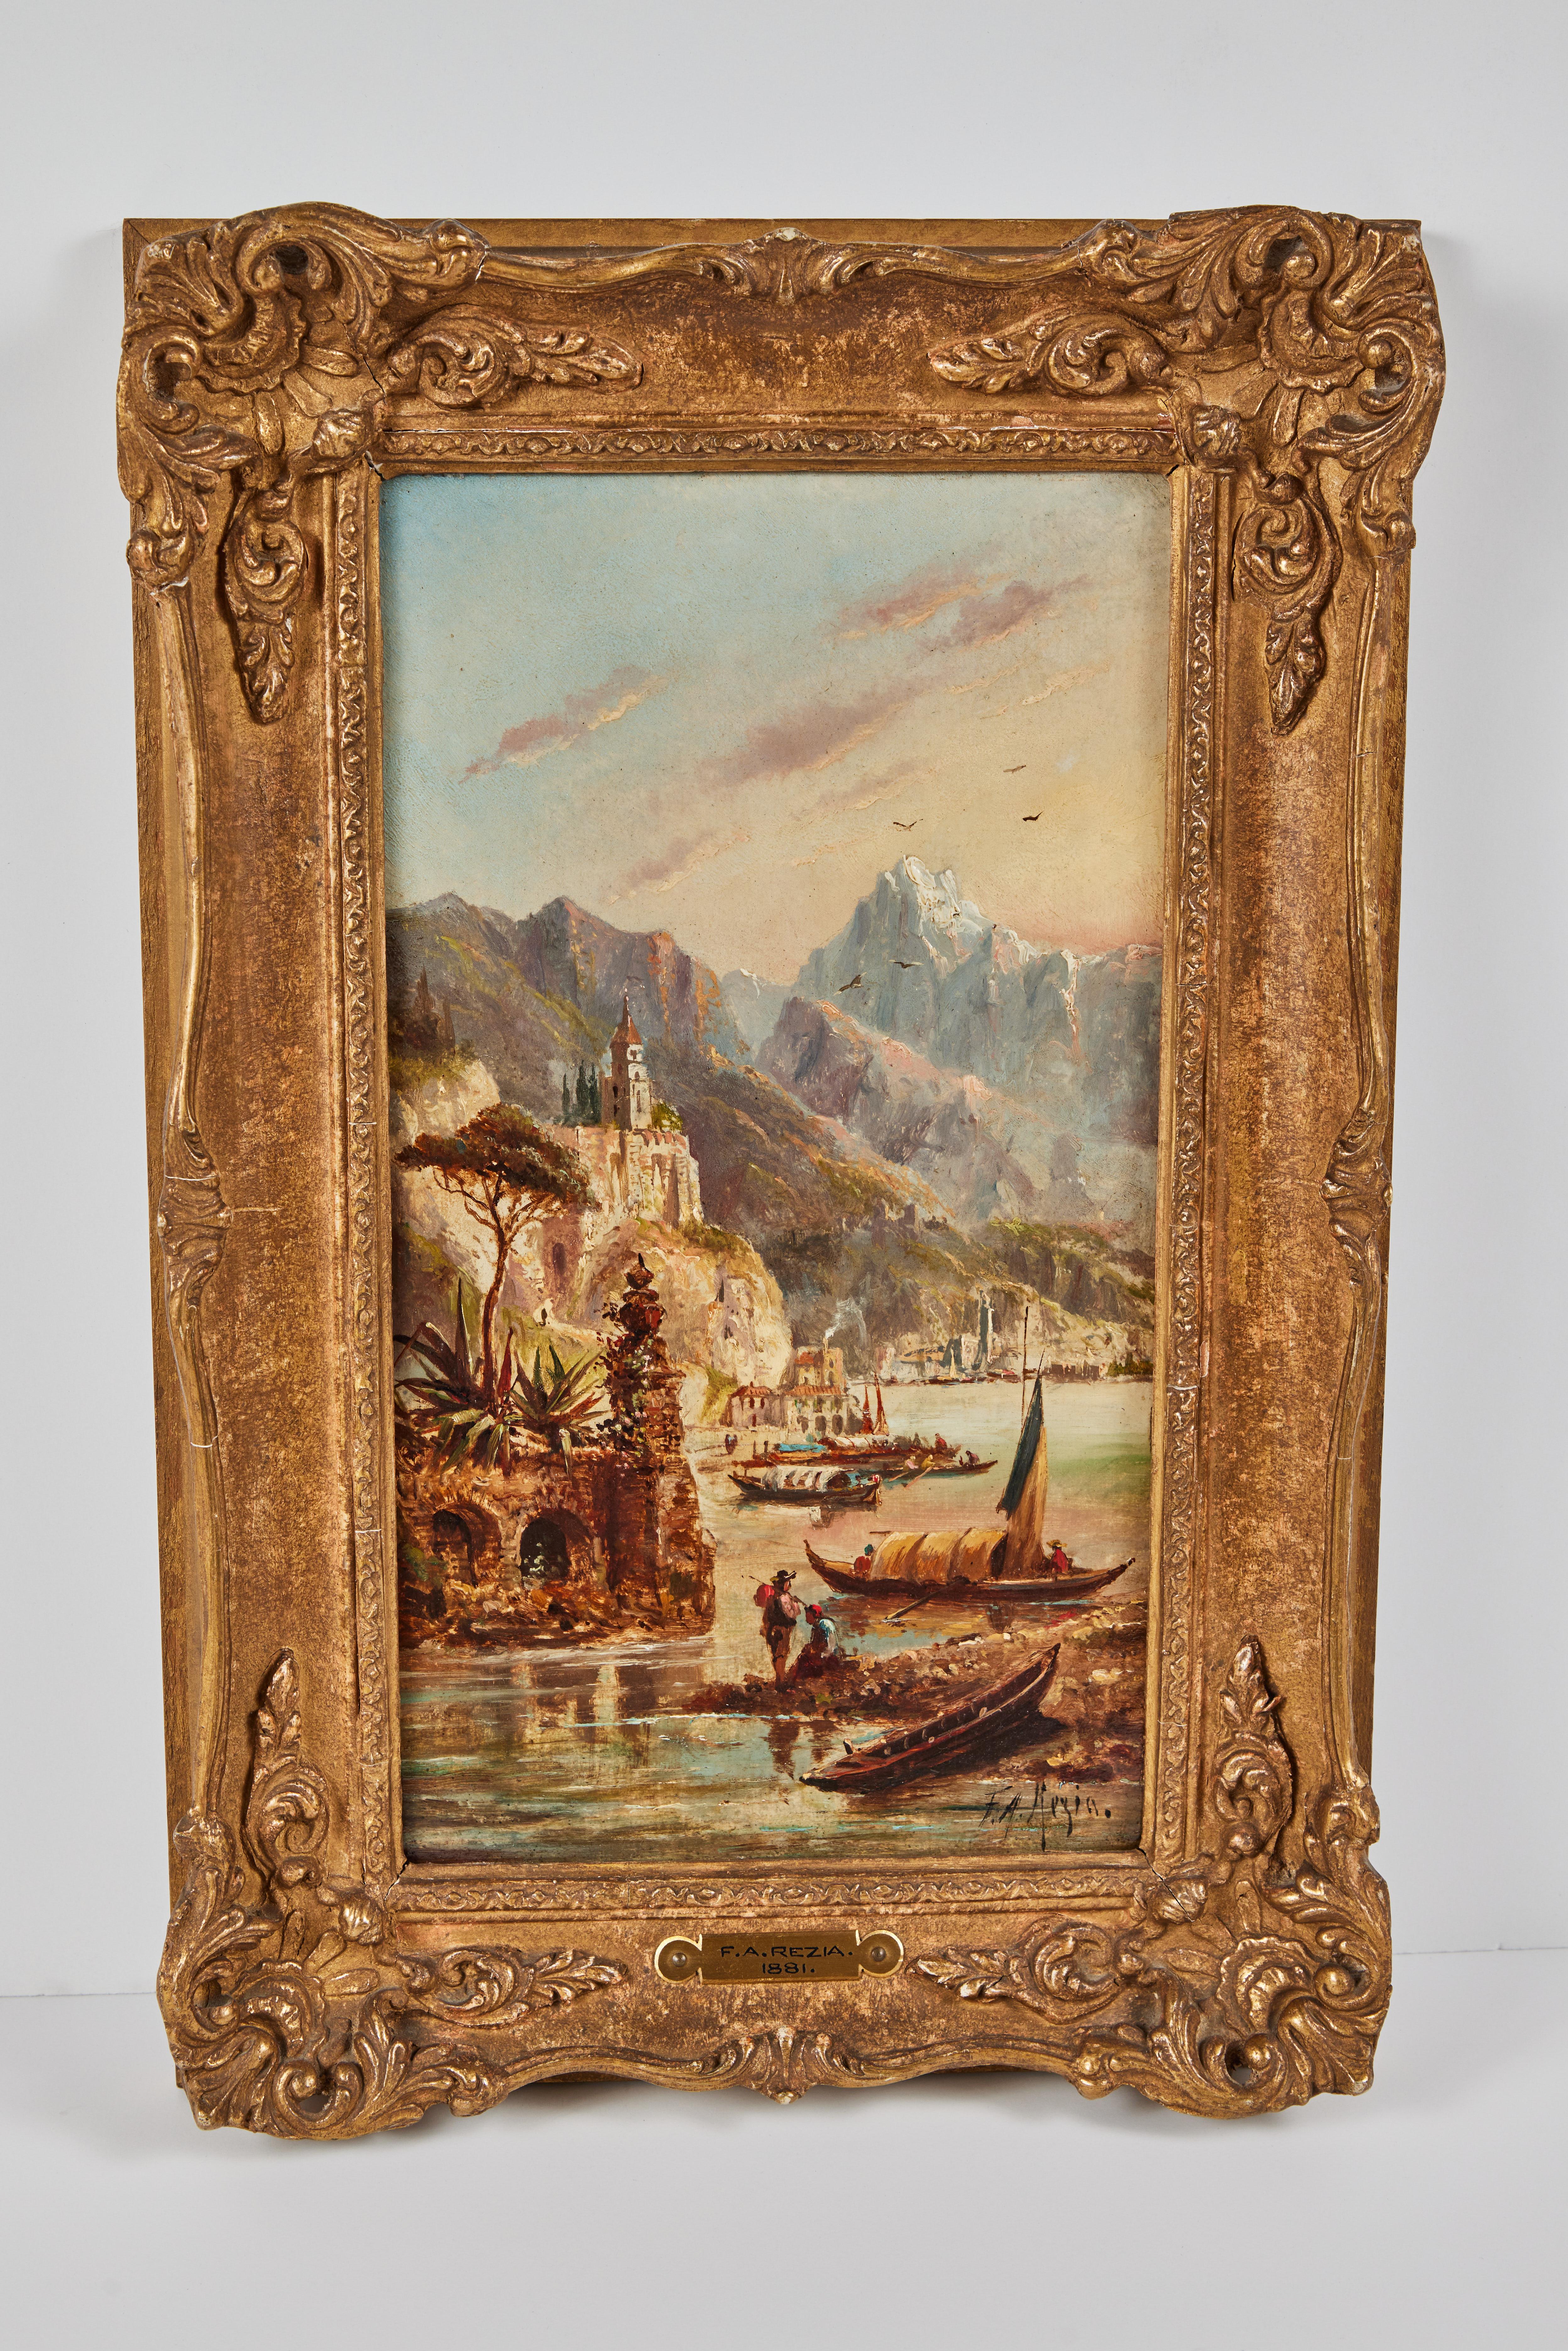 A beautifully painted, mated pair of signed 19th century, oil-on-board, Italian, atmospheric, Capriccio seascapes by listed artist, Franz Auguste Rezia  (1857-1906). Each held in period frames inset with engraved, brass plaques with artist name and